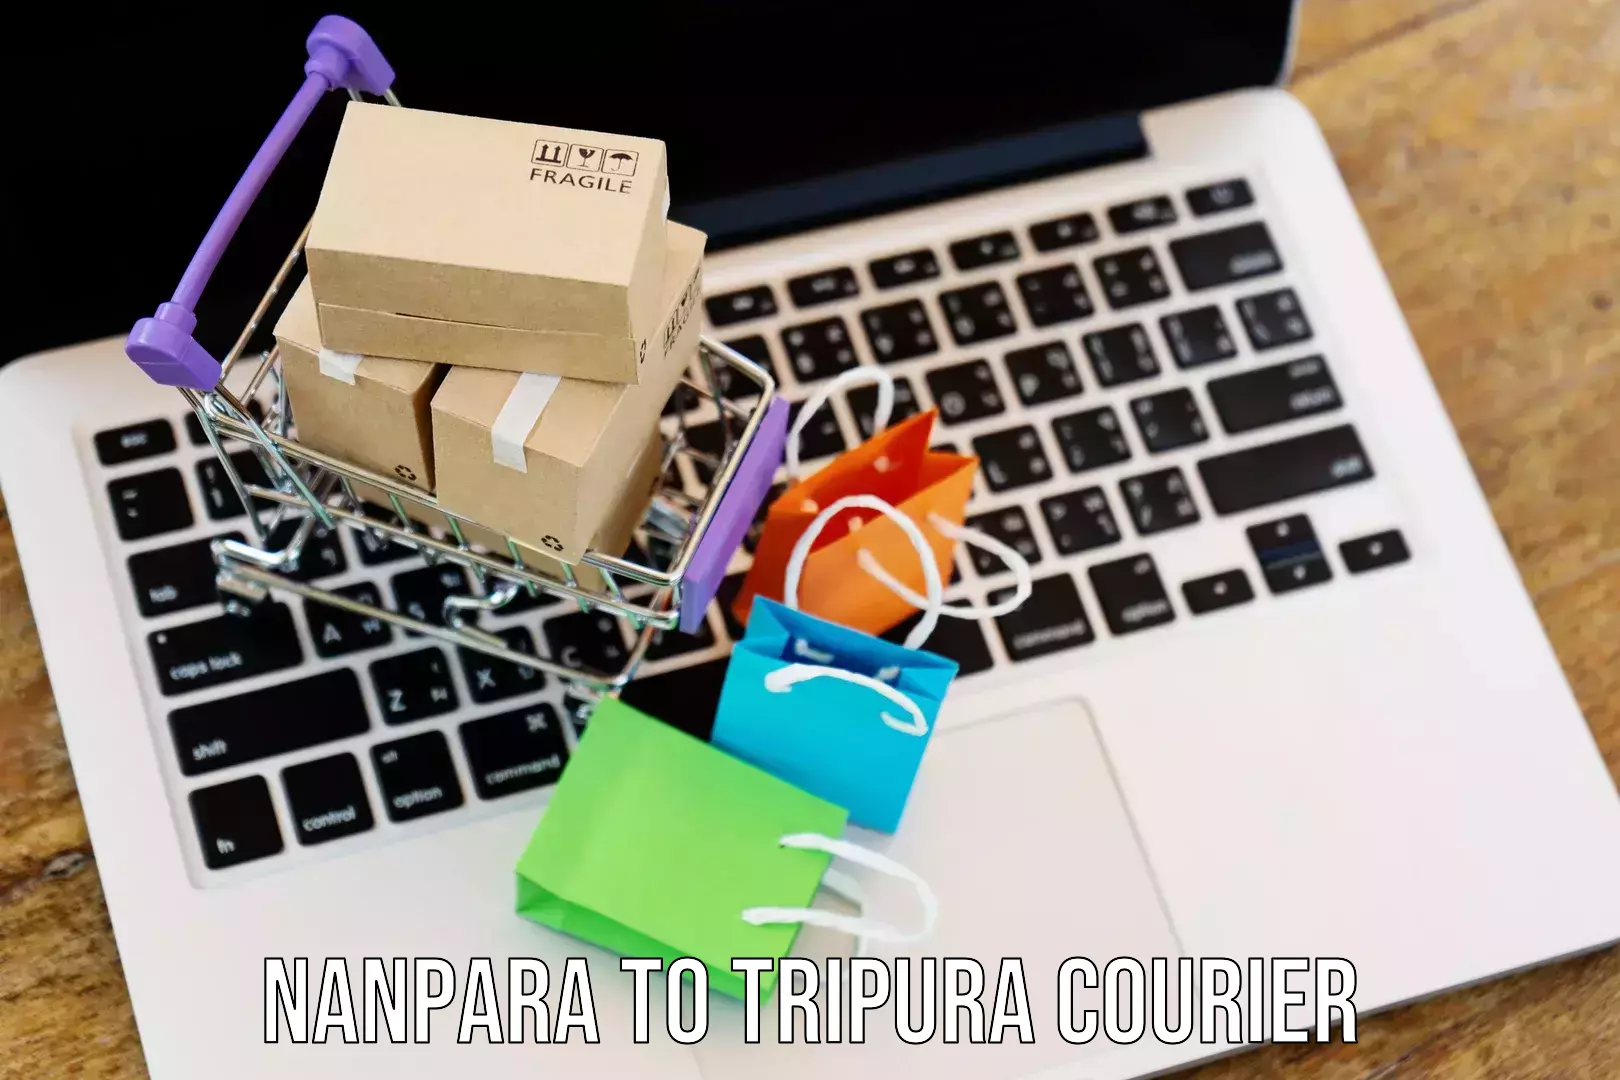 24-hour delivery options Nanpara to Tripura